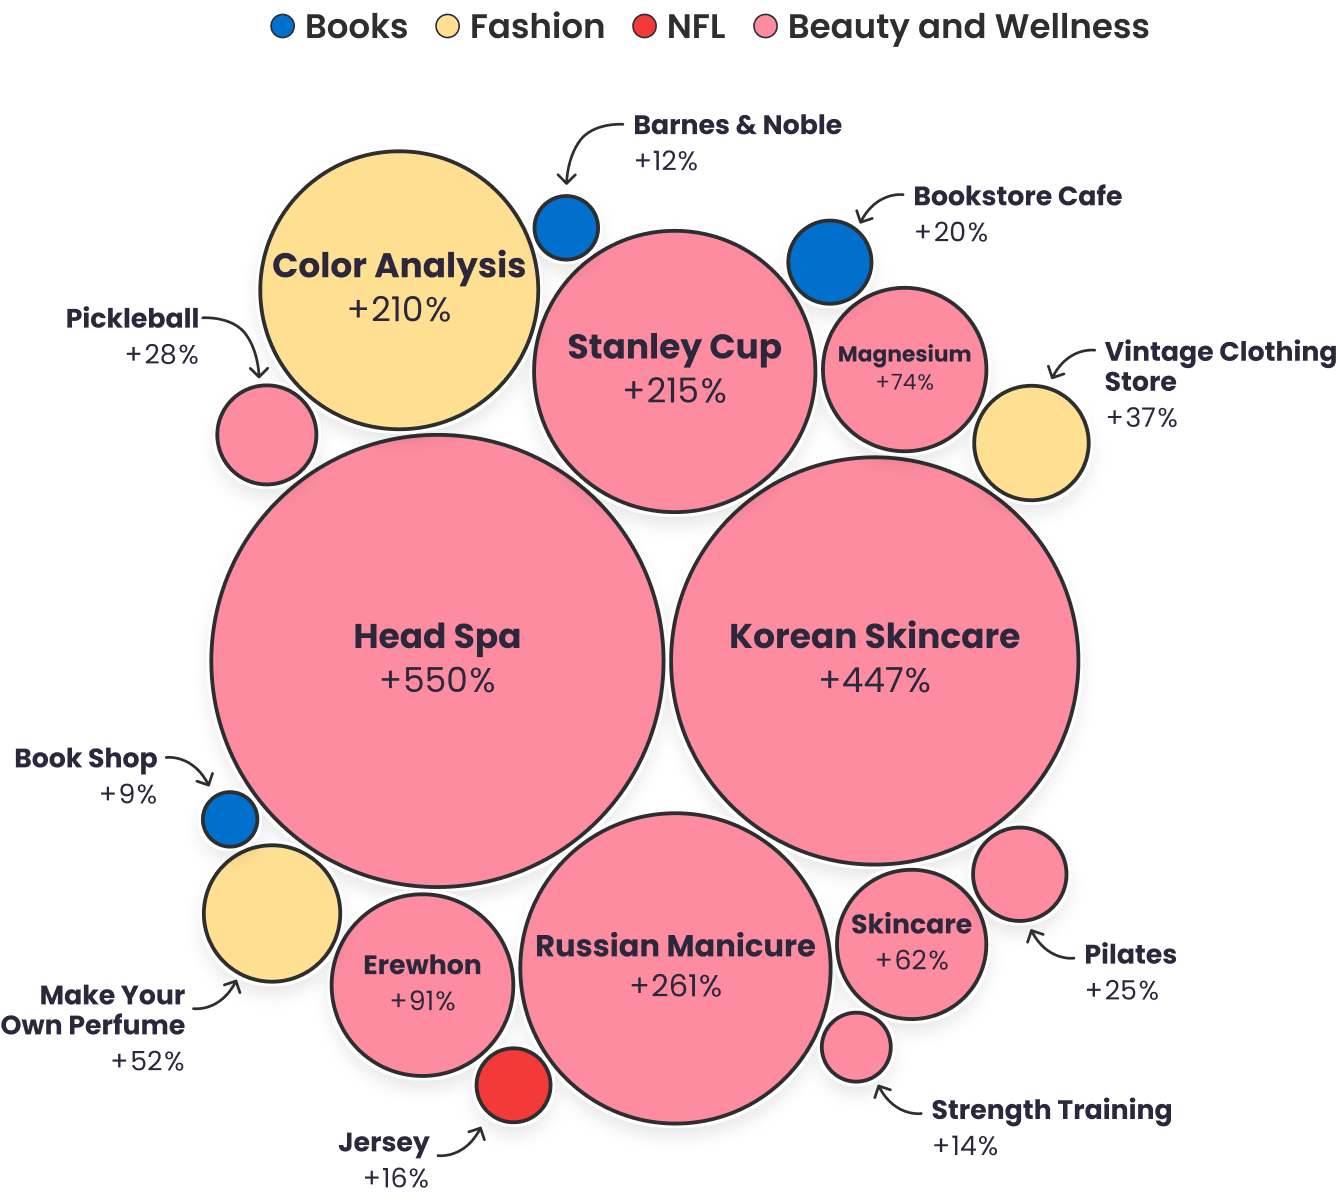 A chart showing women-led microtrends where searches increased, including Head Spas, Korean Skincare, and Russian Manicures.